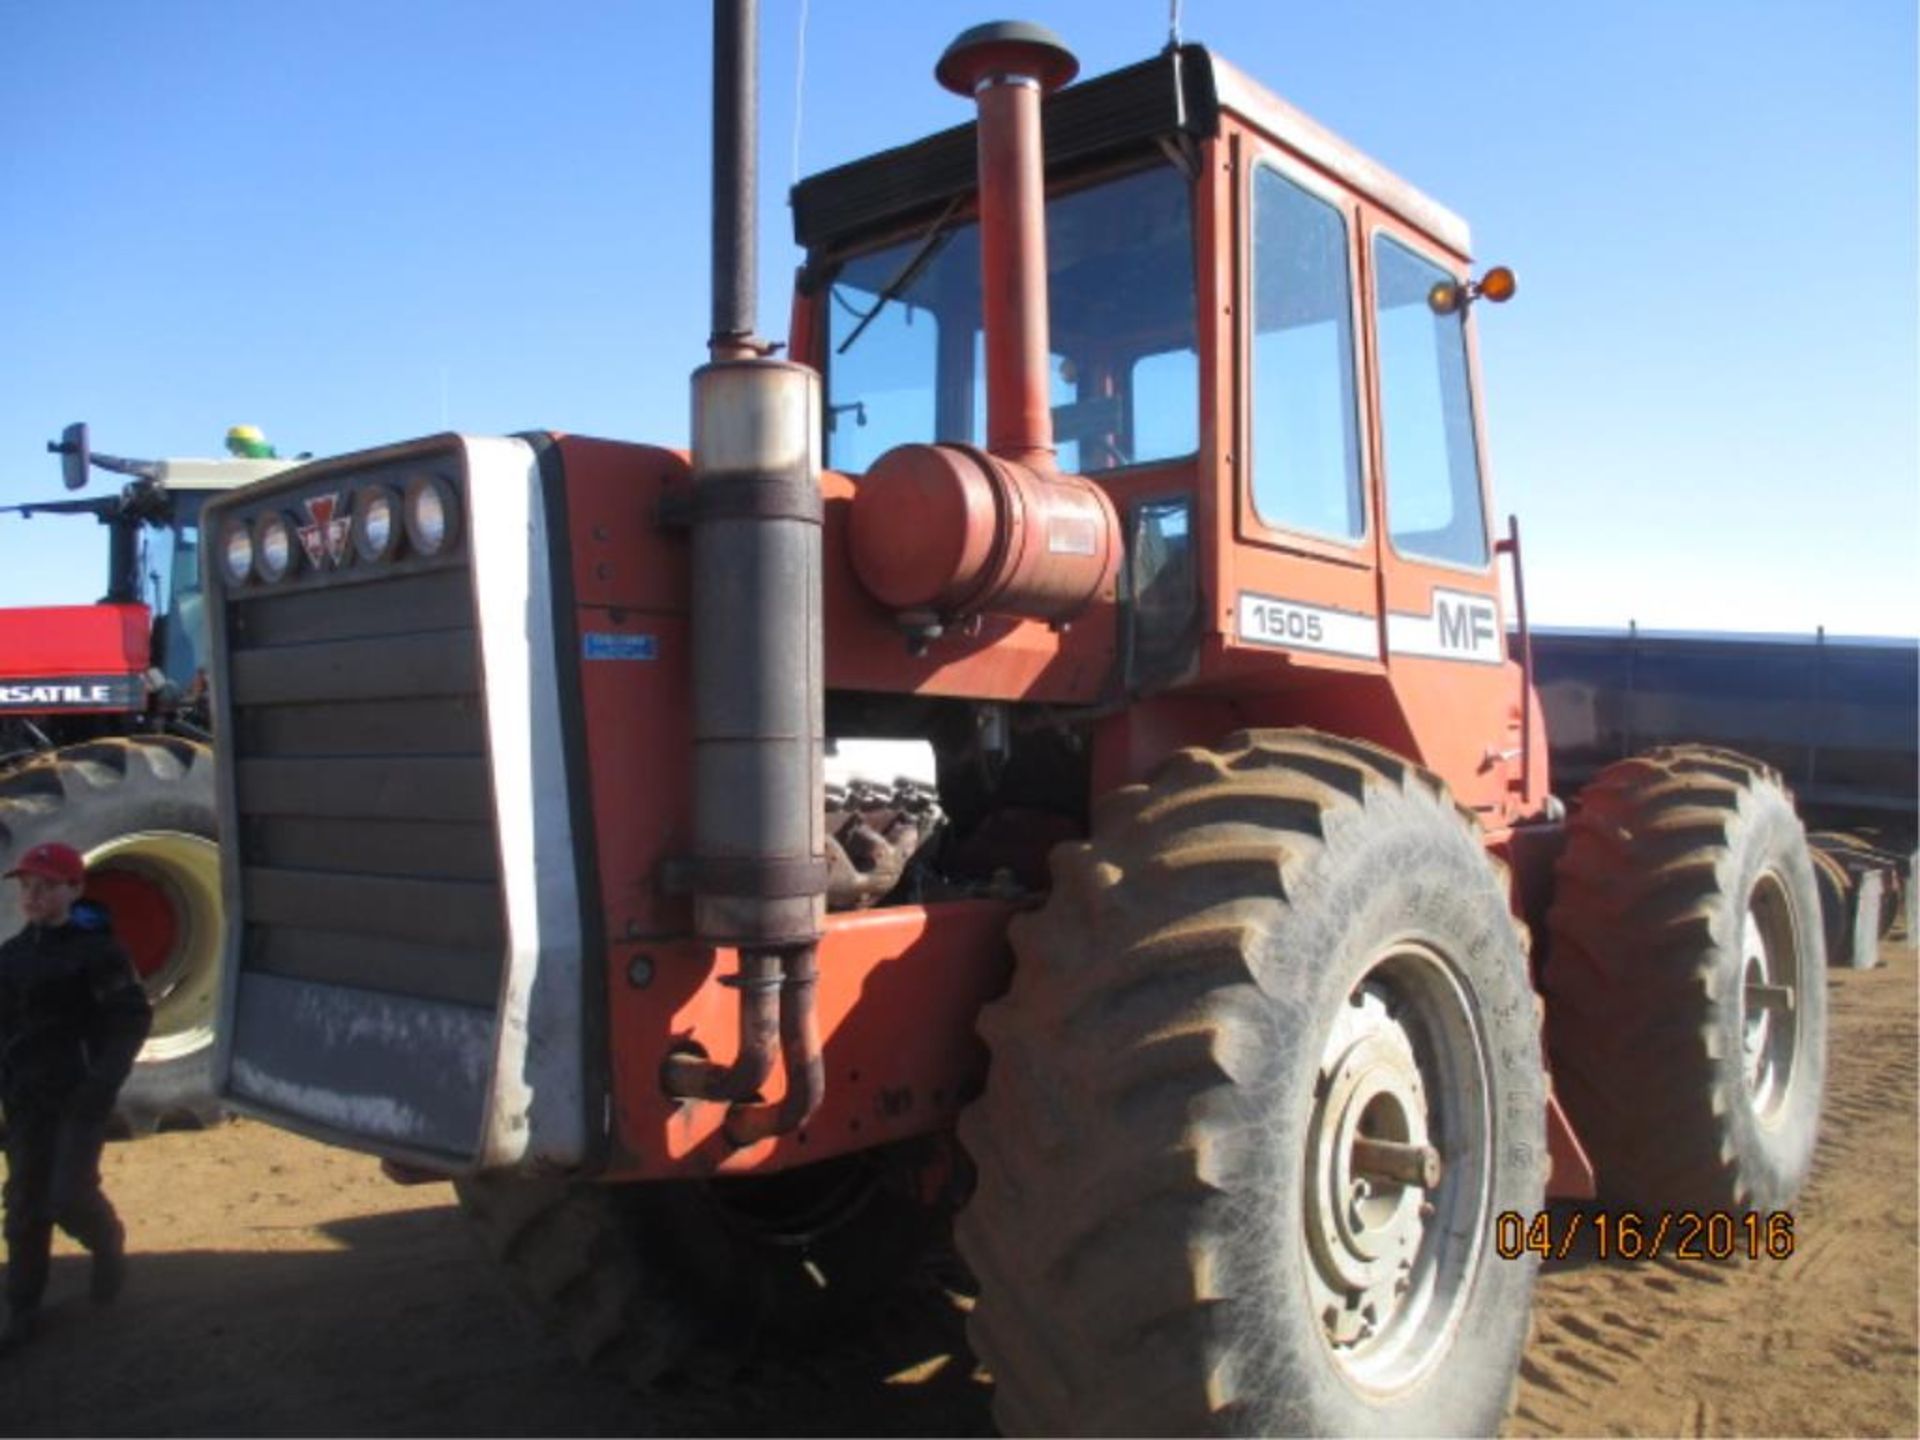 1505 MF 4wd Tractor